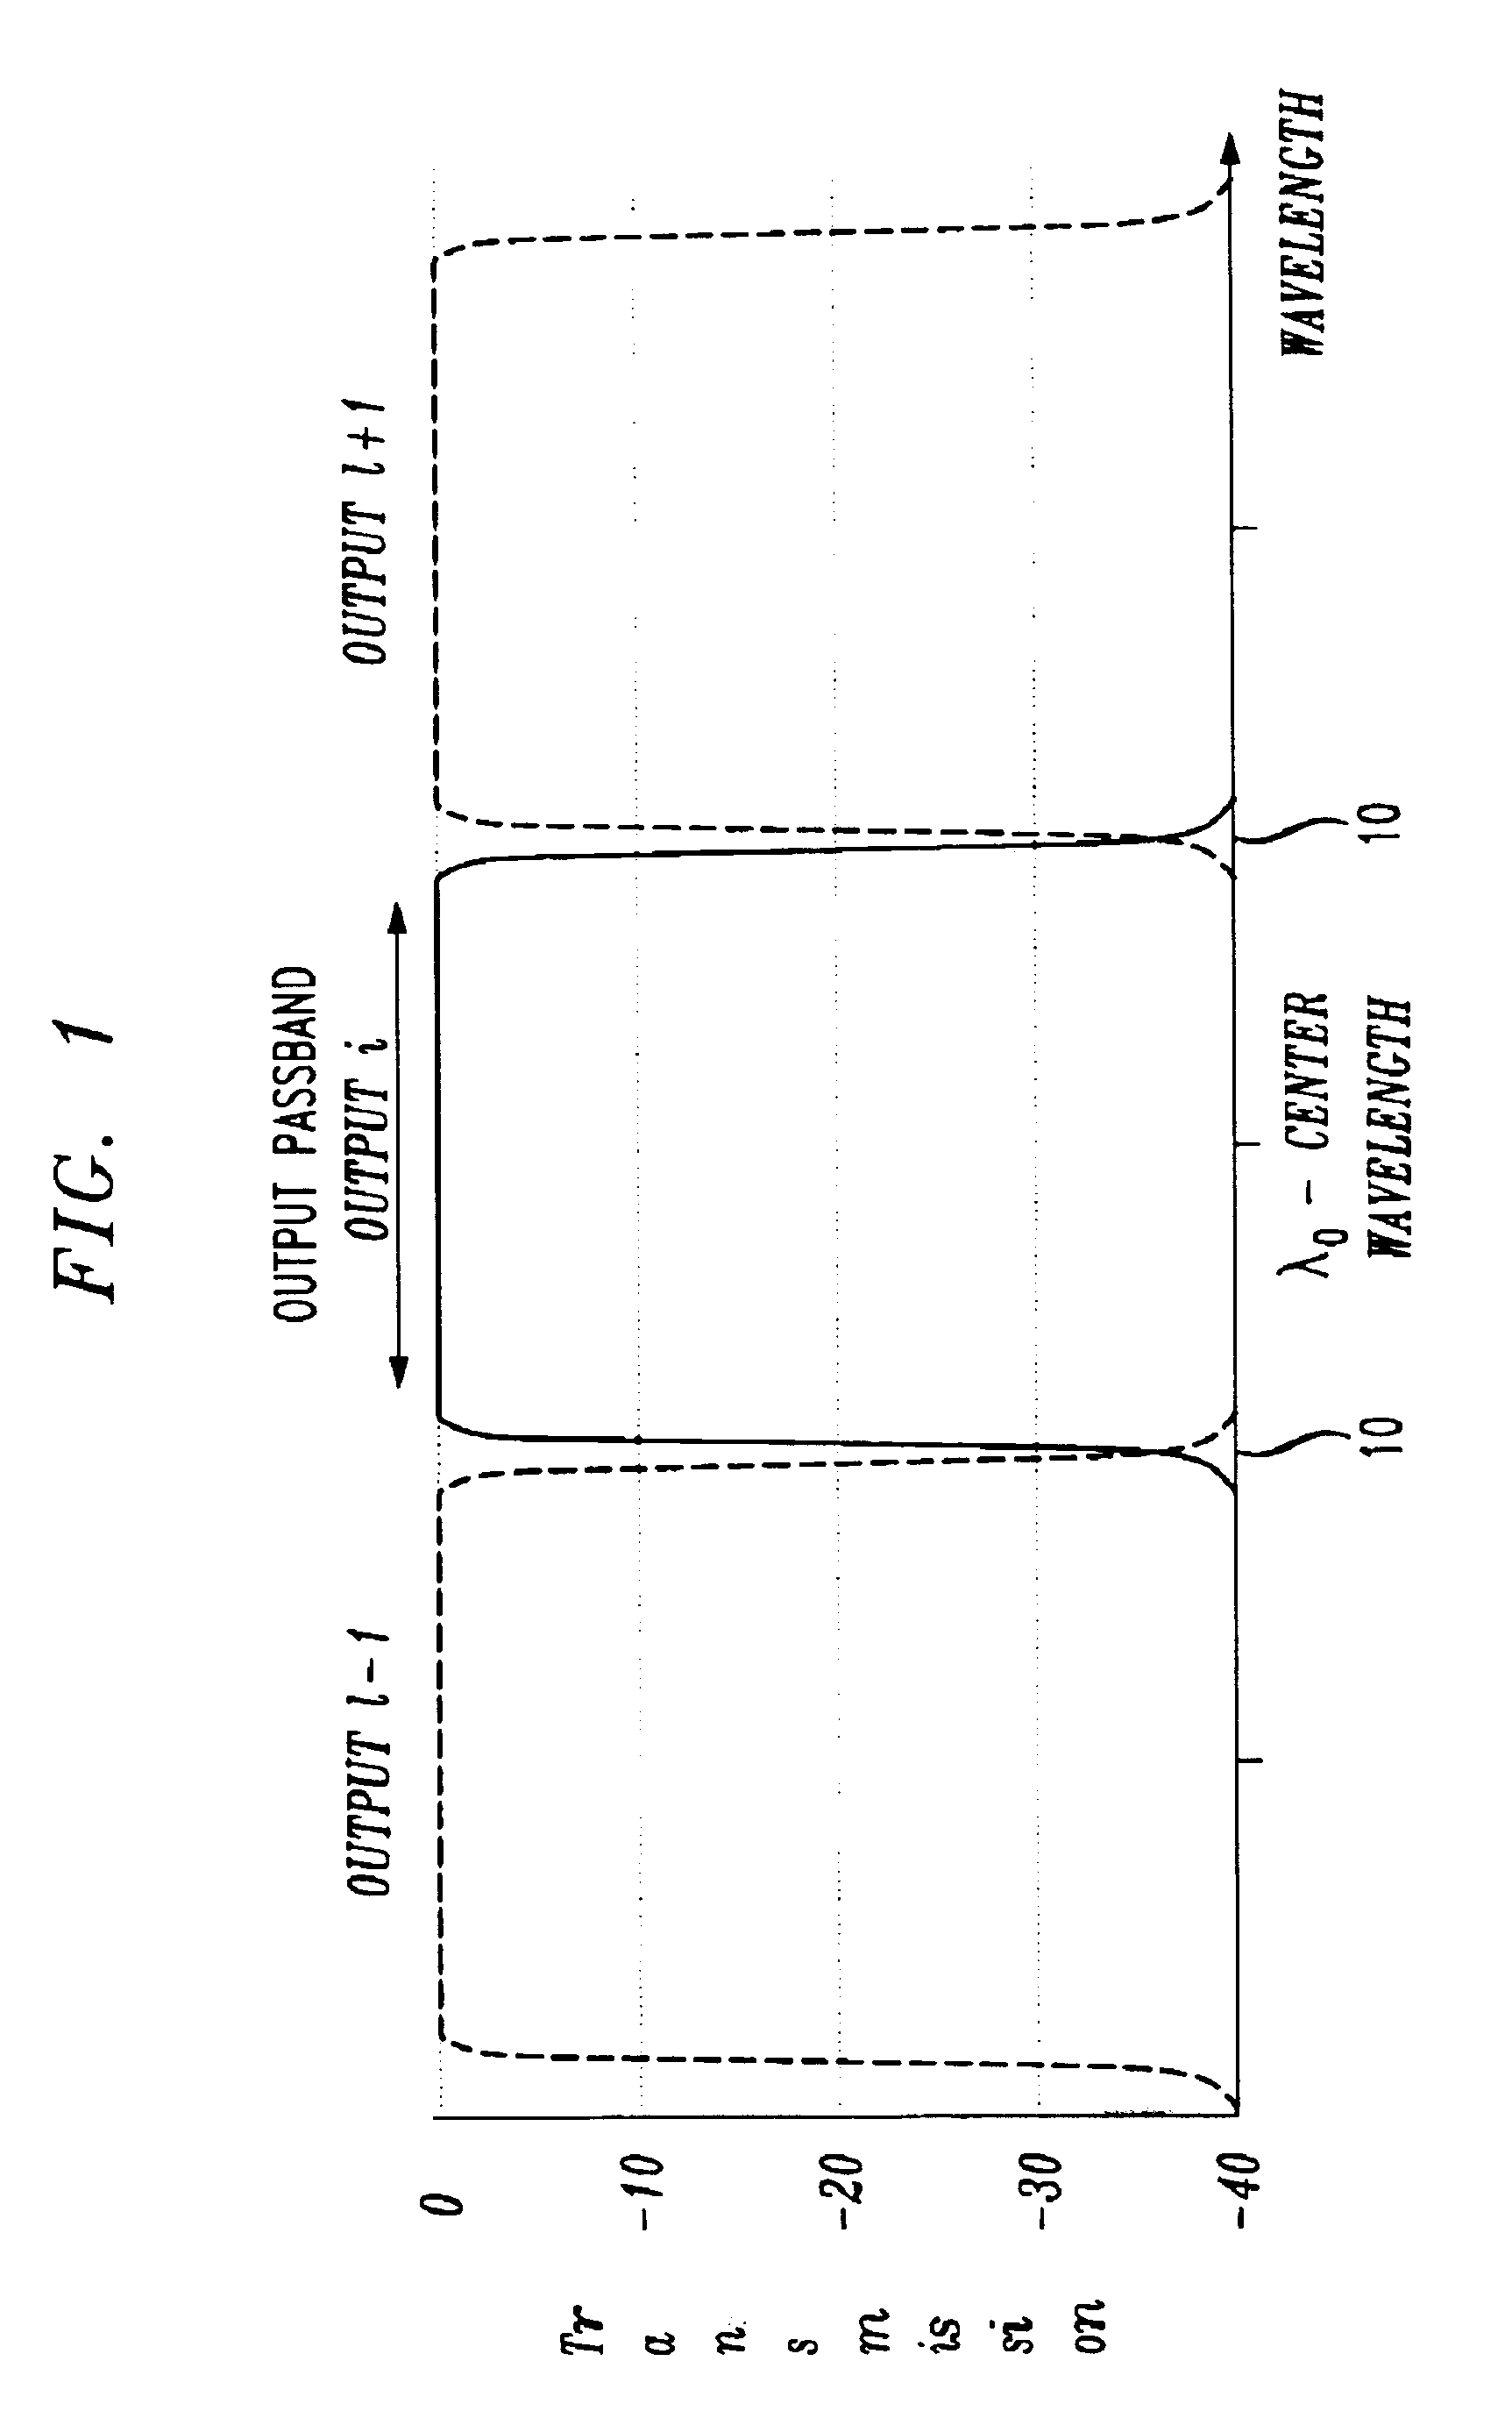 Method and apparatus for spatial-shift wavelength multiplexing in communication systems